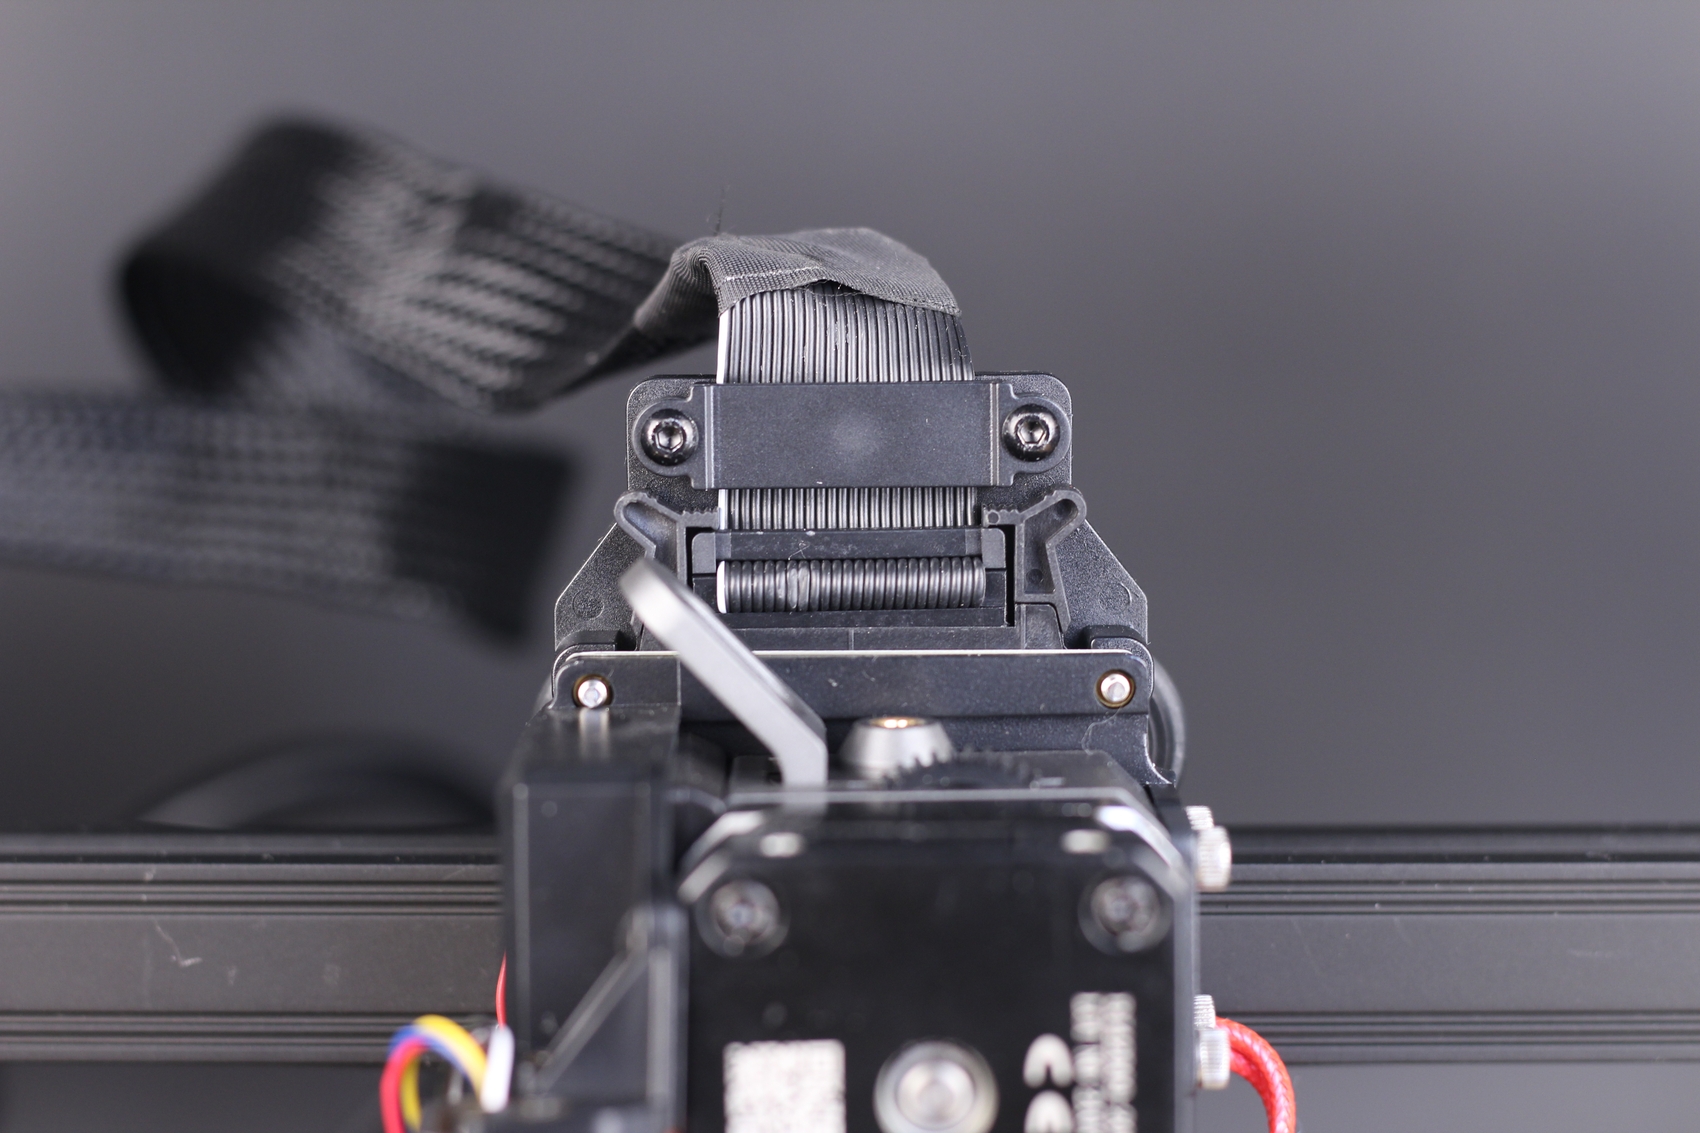 Integrated Ribbon Cable Strain Relief CR 10 Smart Pro | Creality CR-10 Smart Pro Review: Capable but Pricey